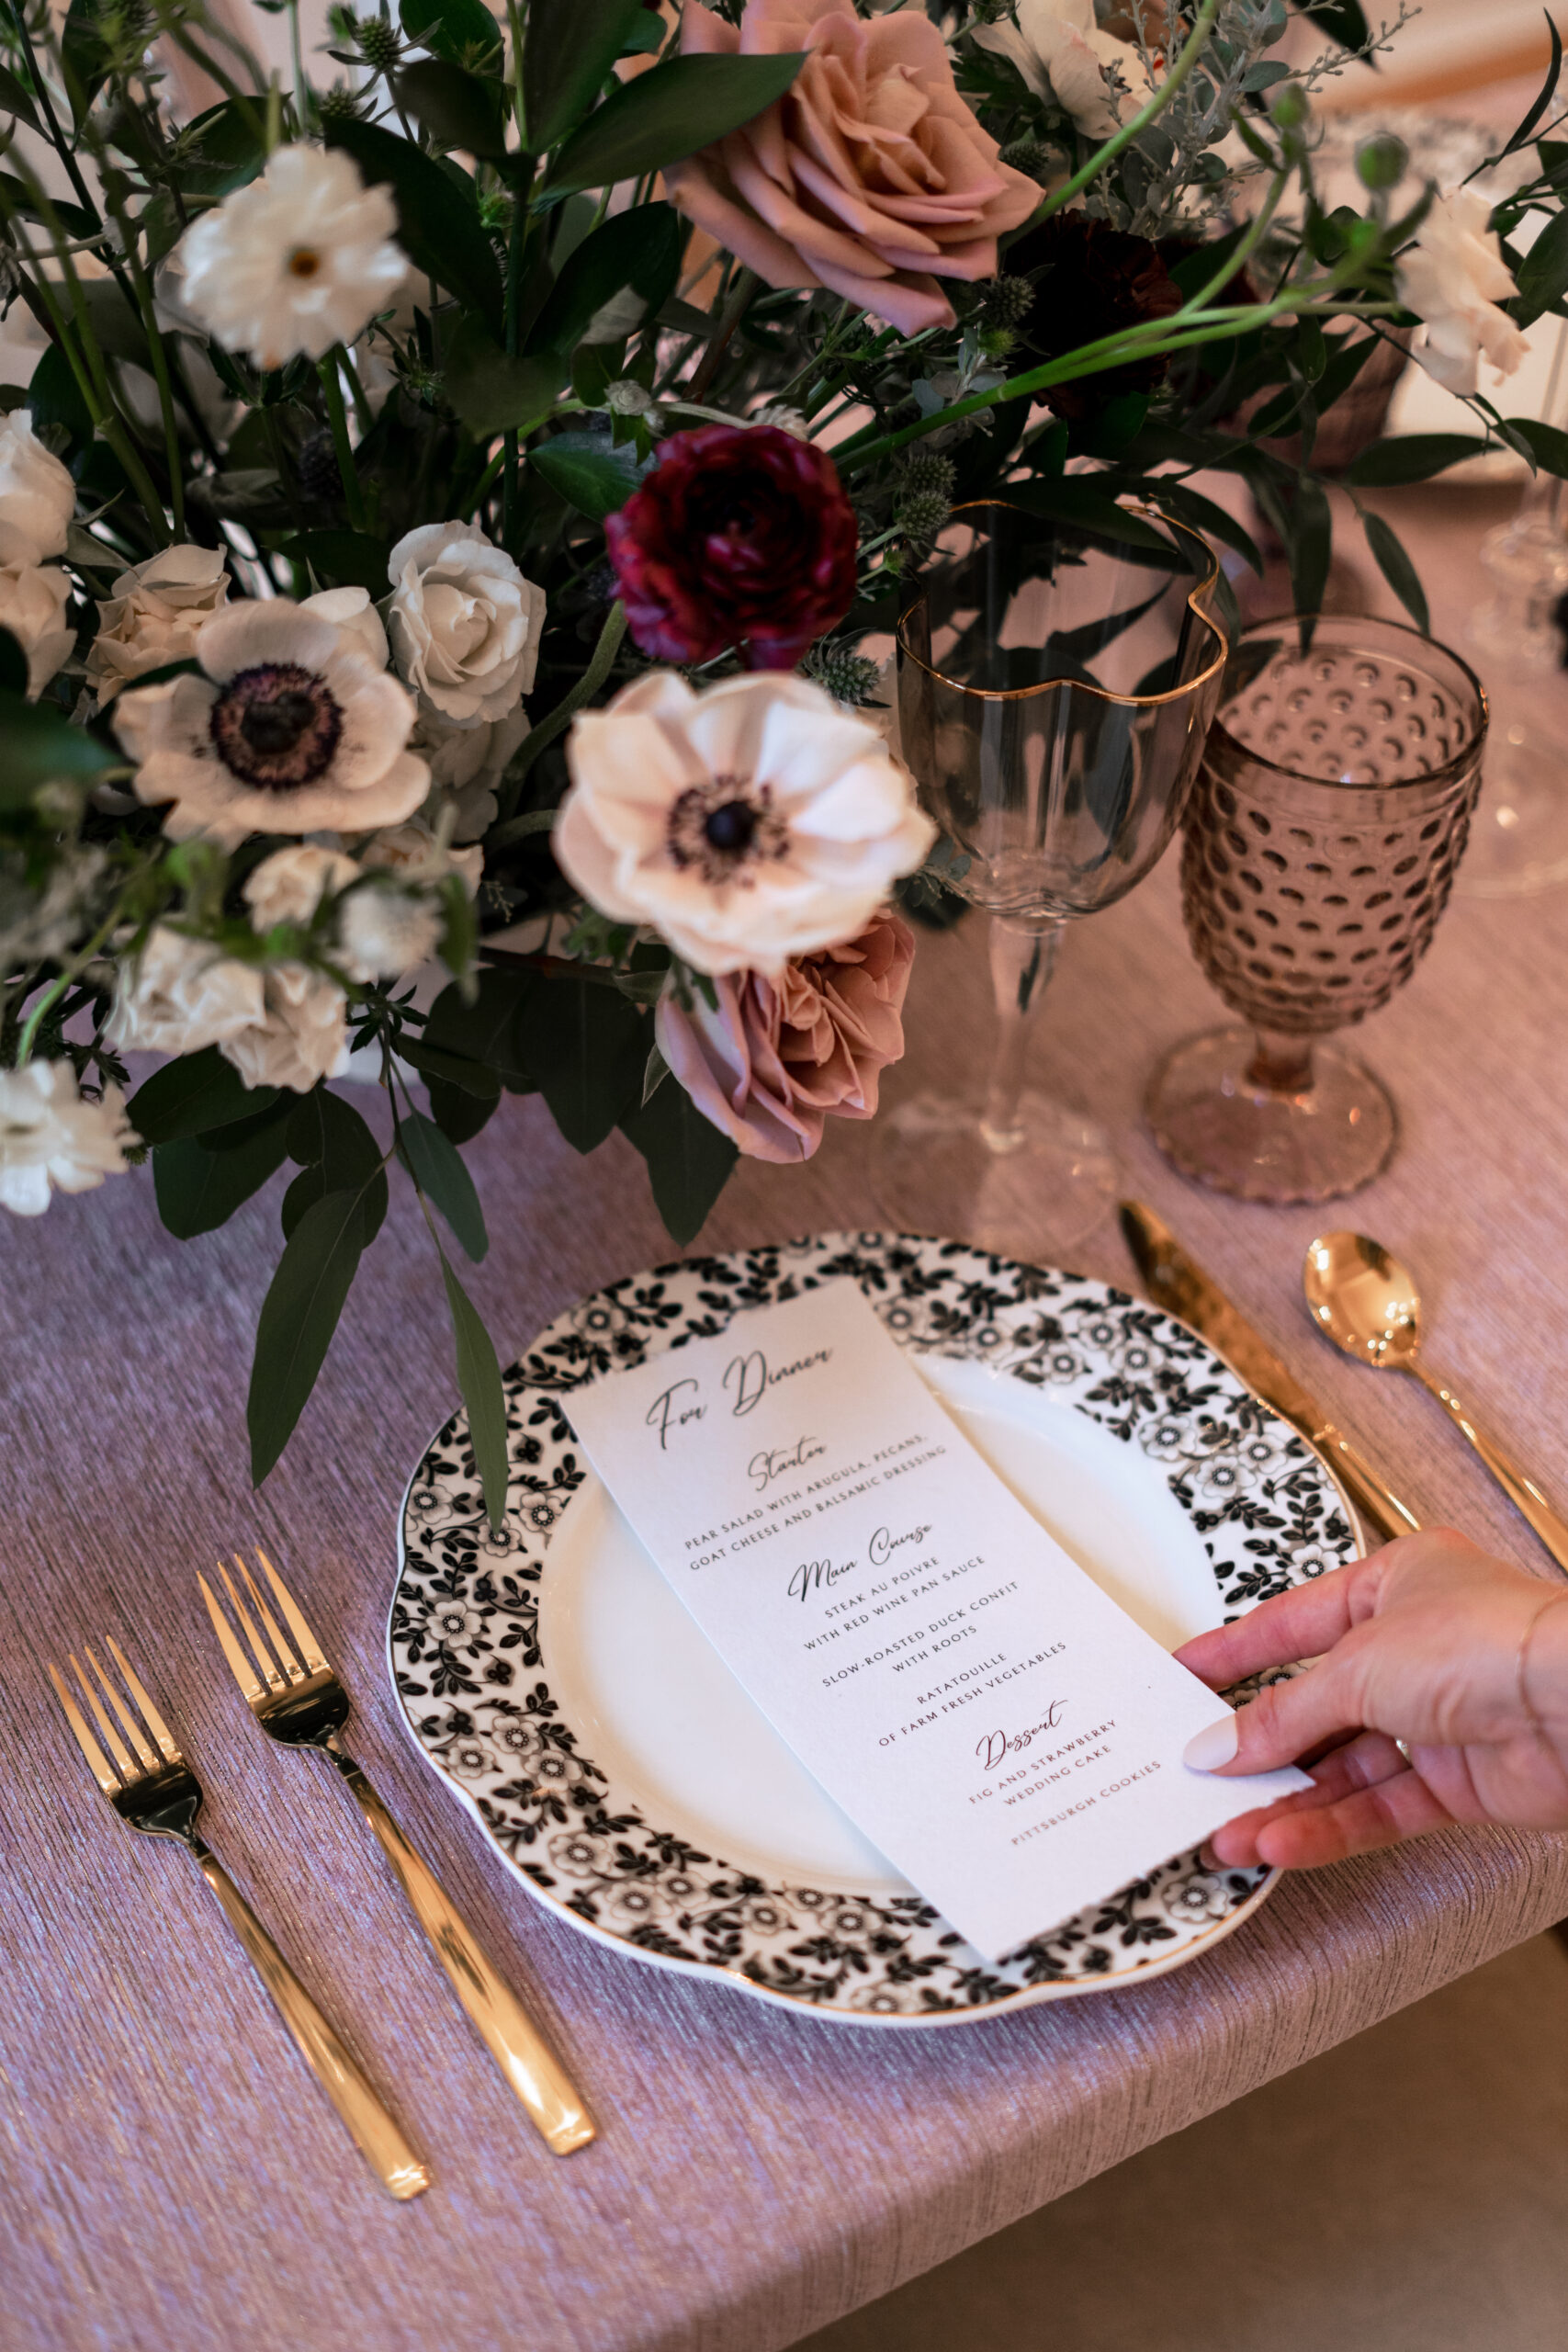 A photo of a dinner setting and menu at a wedding.